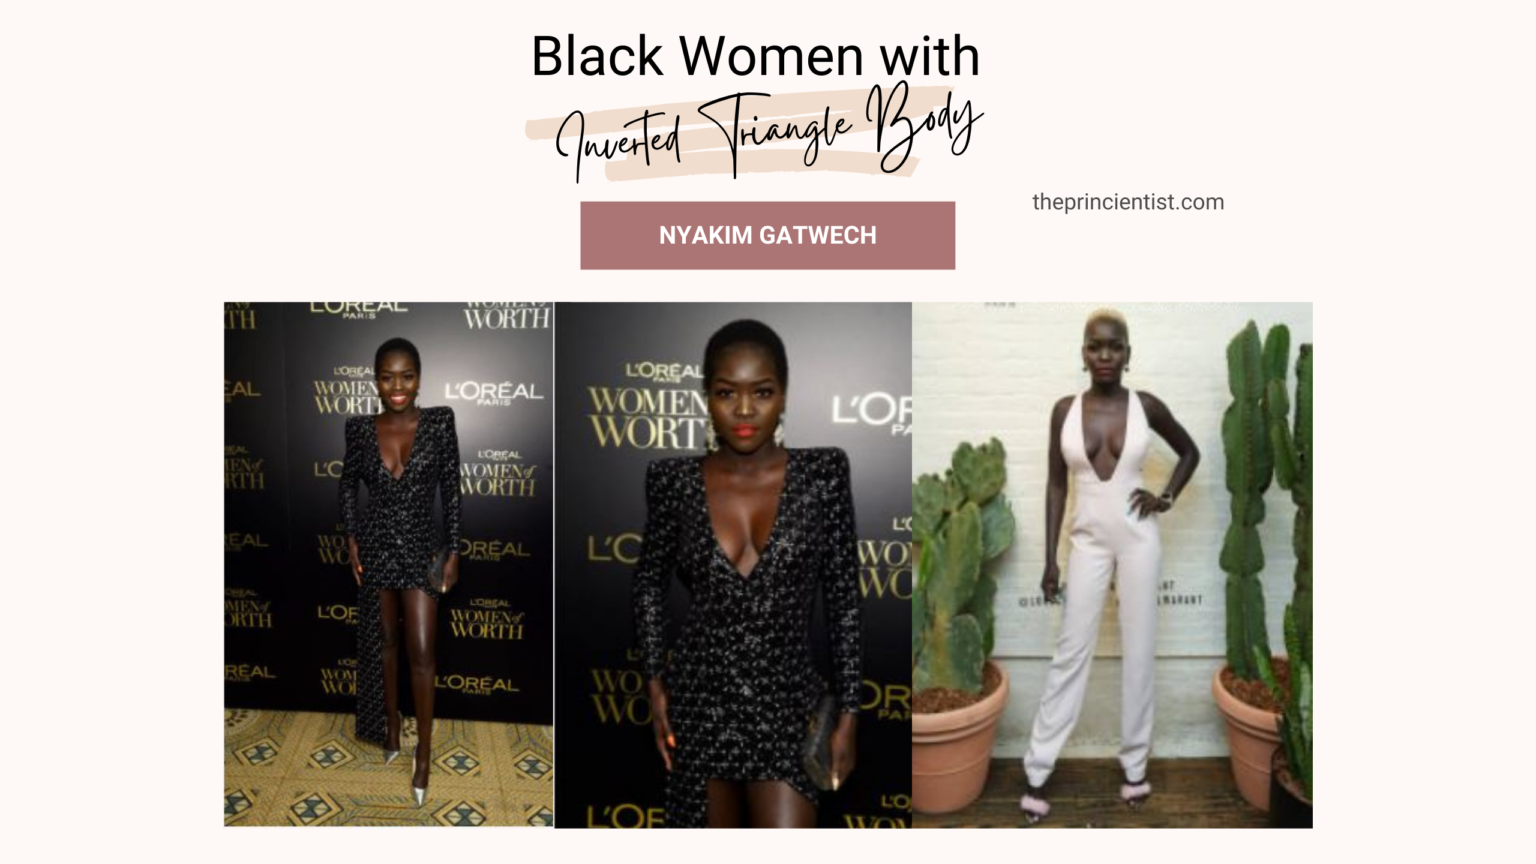 black women with the inverted triangle body shape - nyakim gatwech